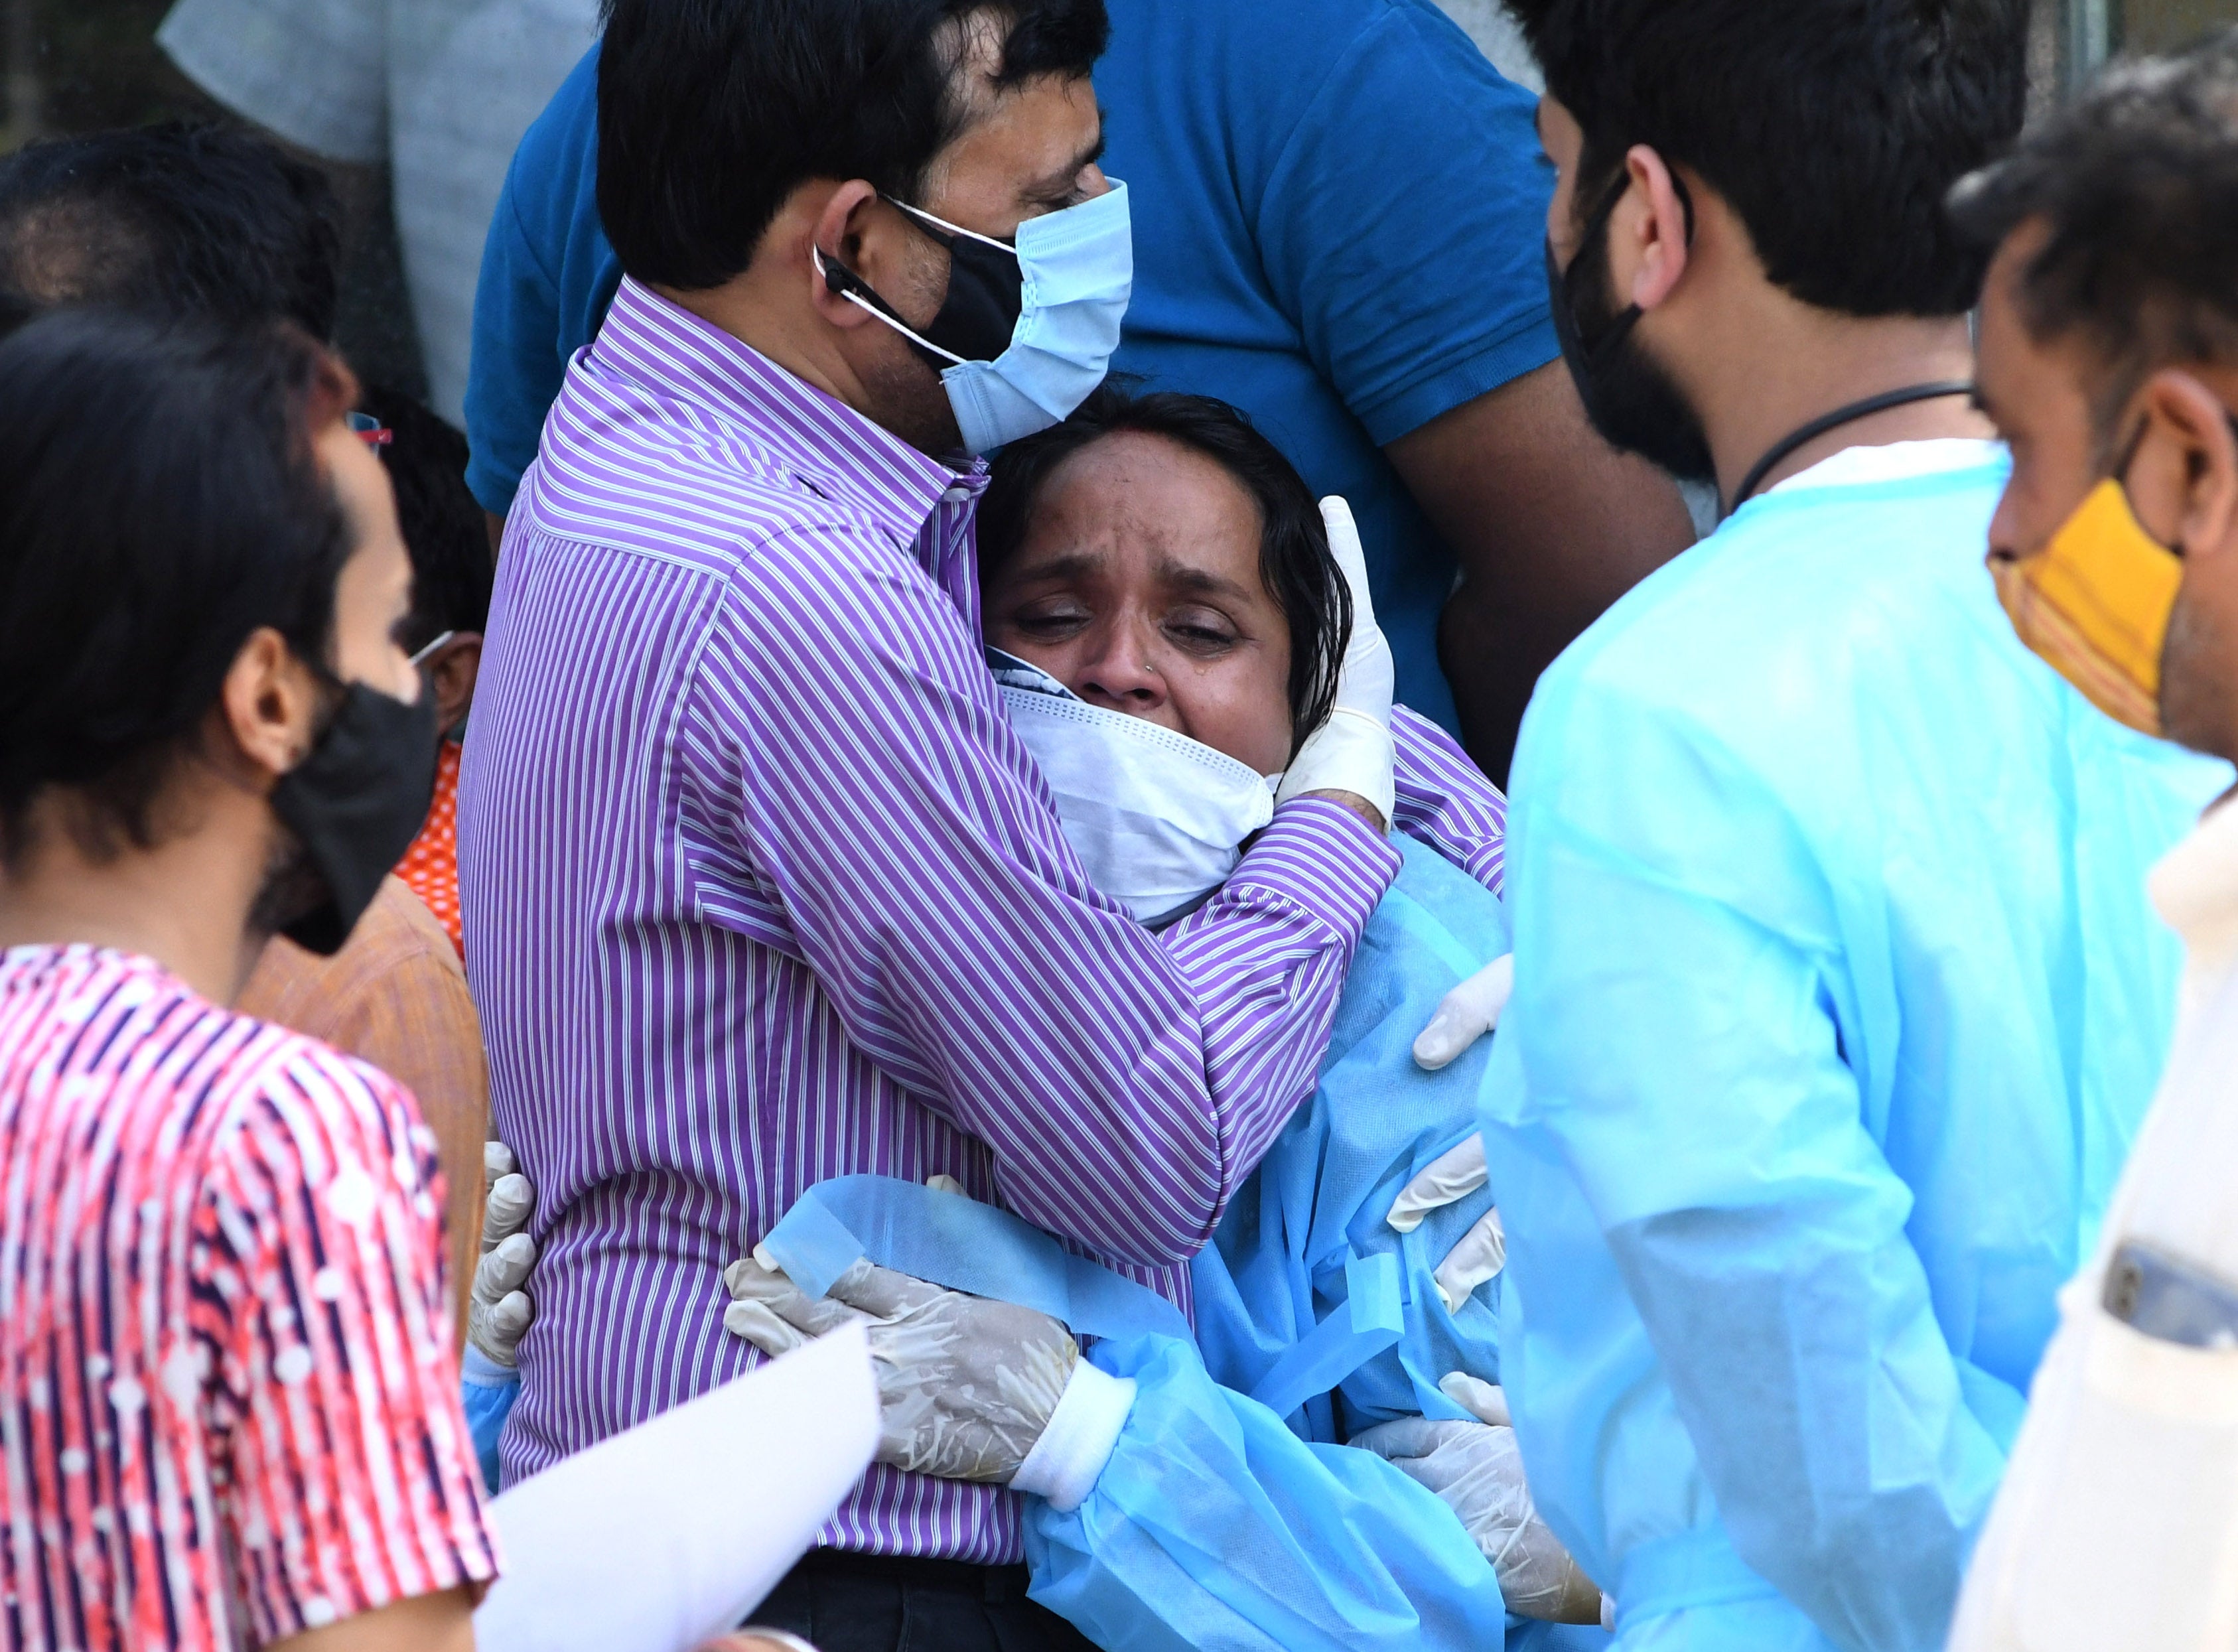 Relatives mourn during the last rites of a Covid-19 victim at a crematorium in New Delhi on Monday